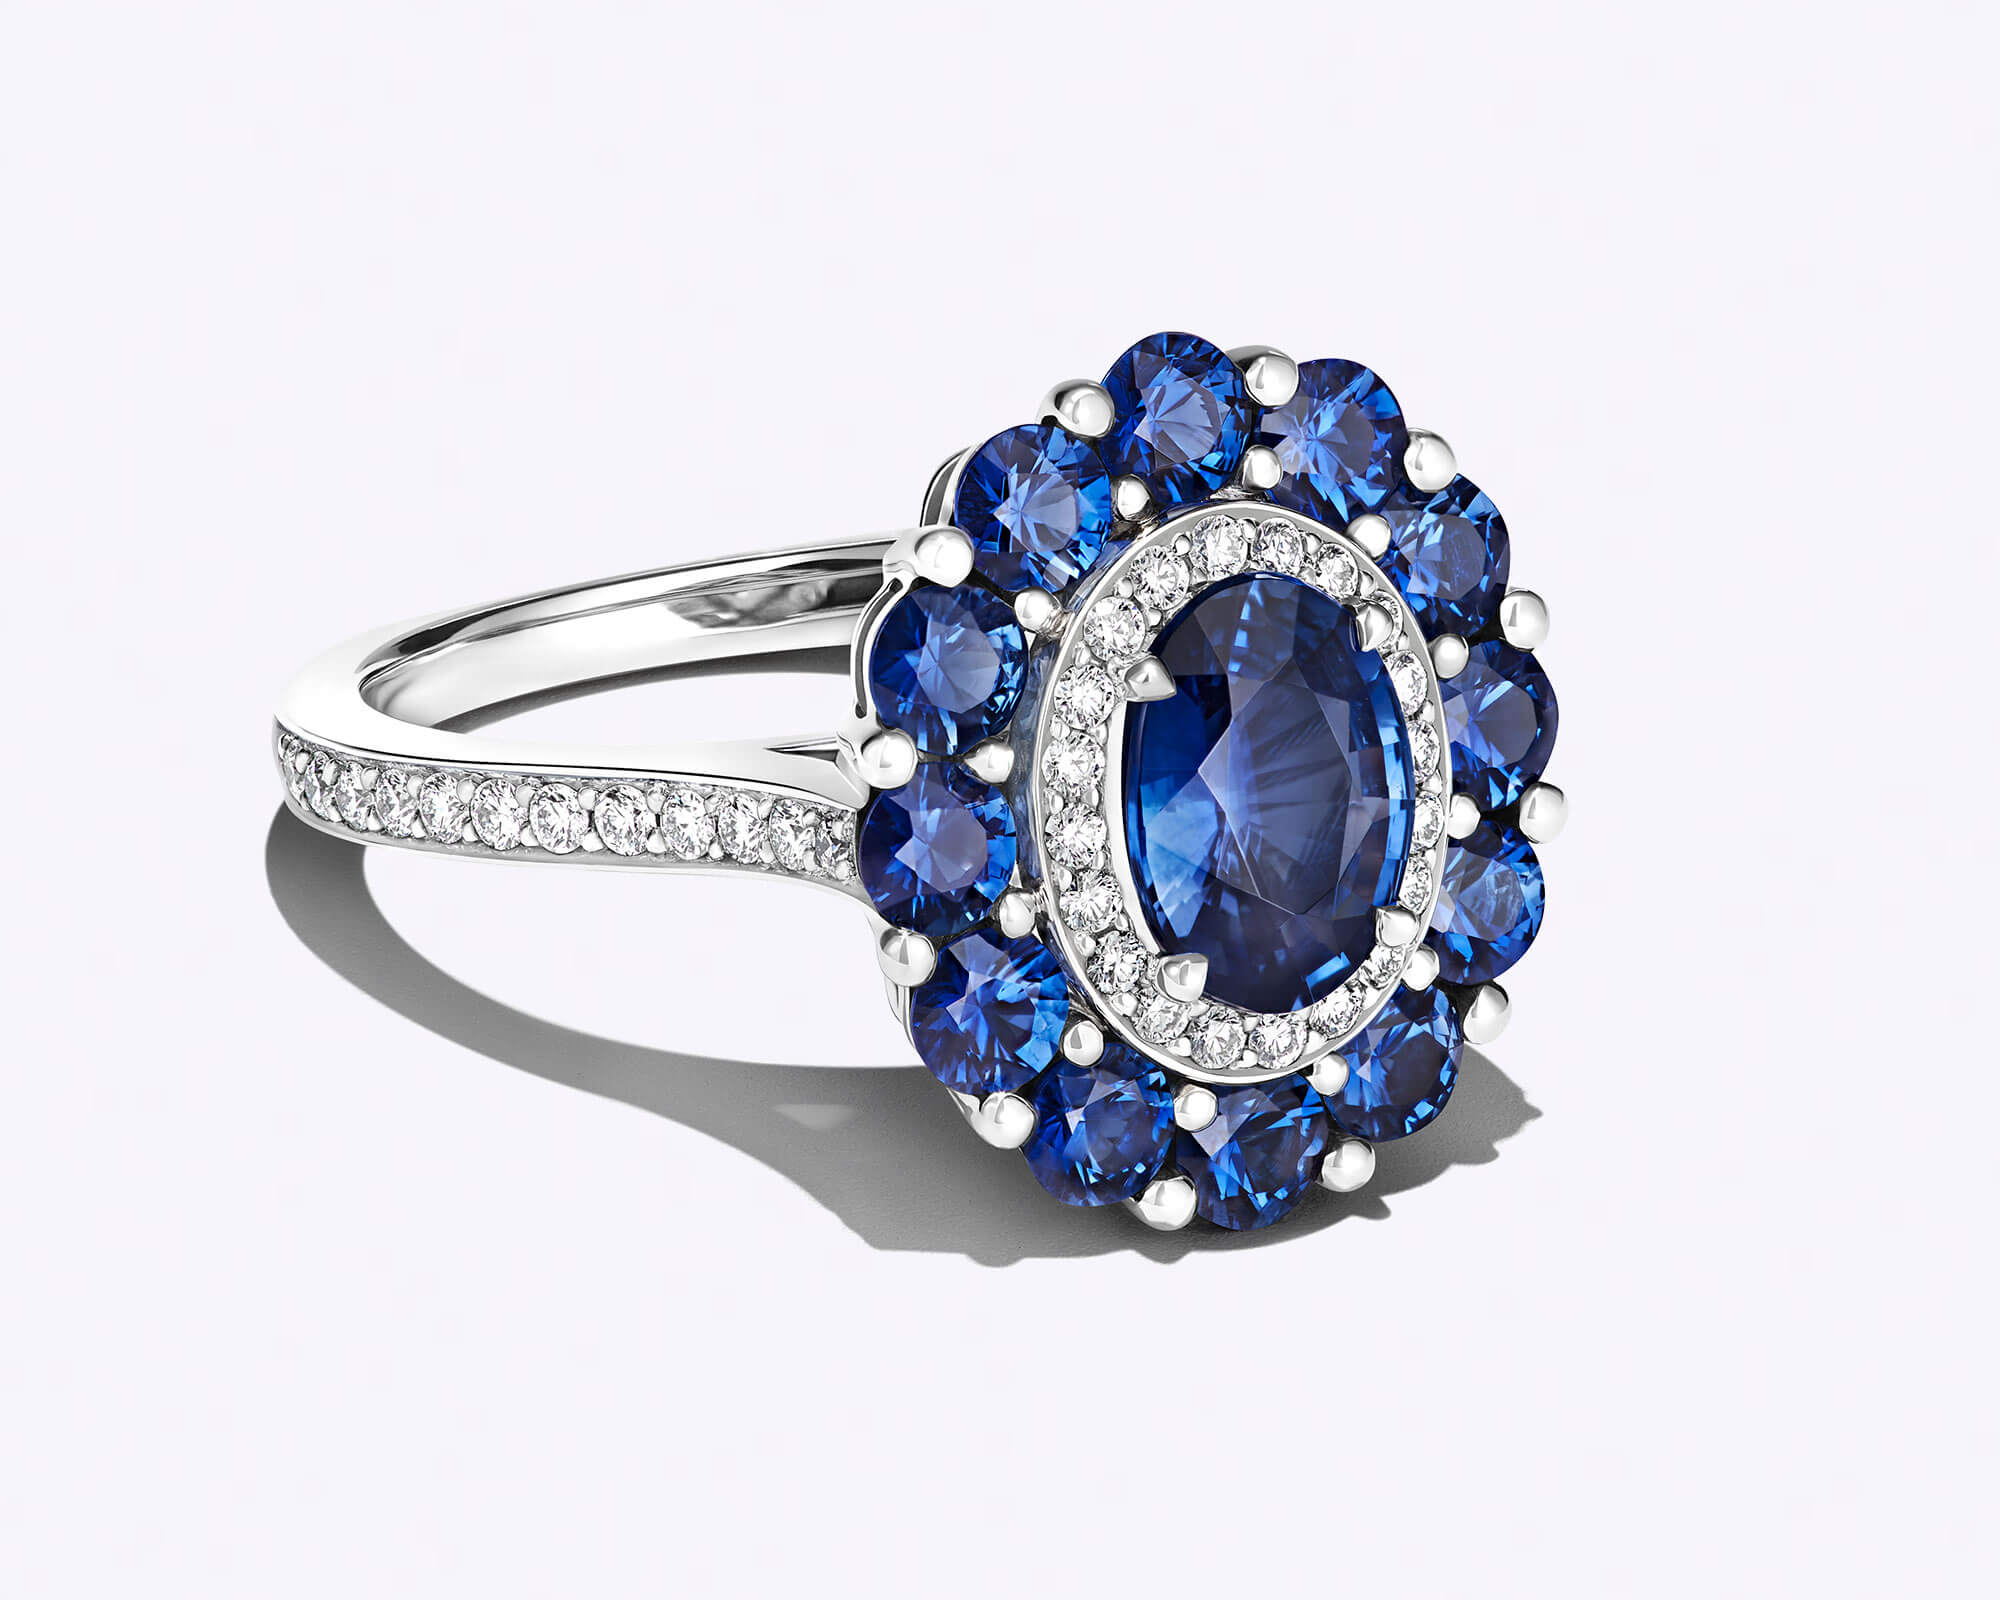 Garrard 1735 colour cluster sapphire and diamond ring, inspired by princess diana's famous sapphire engagement ring